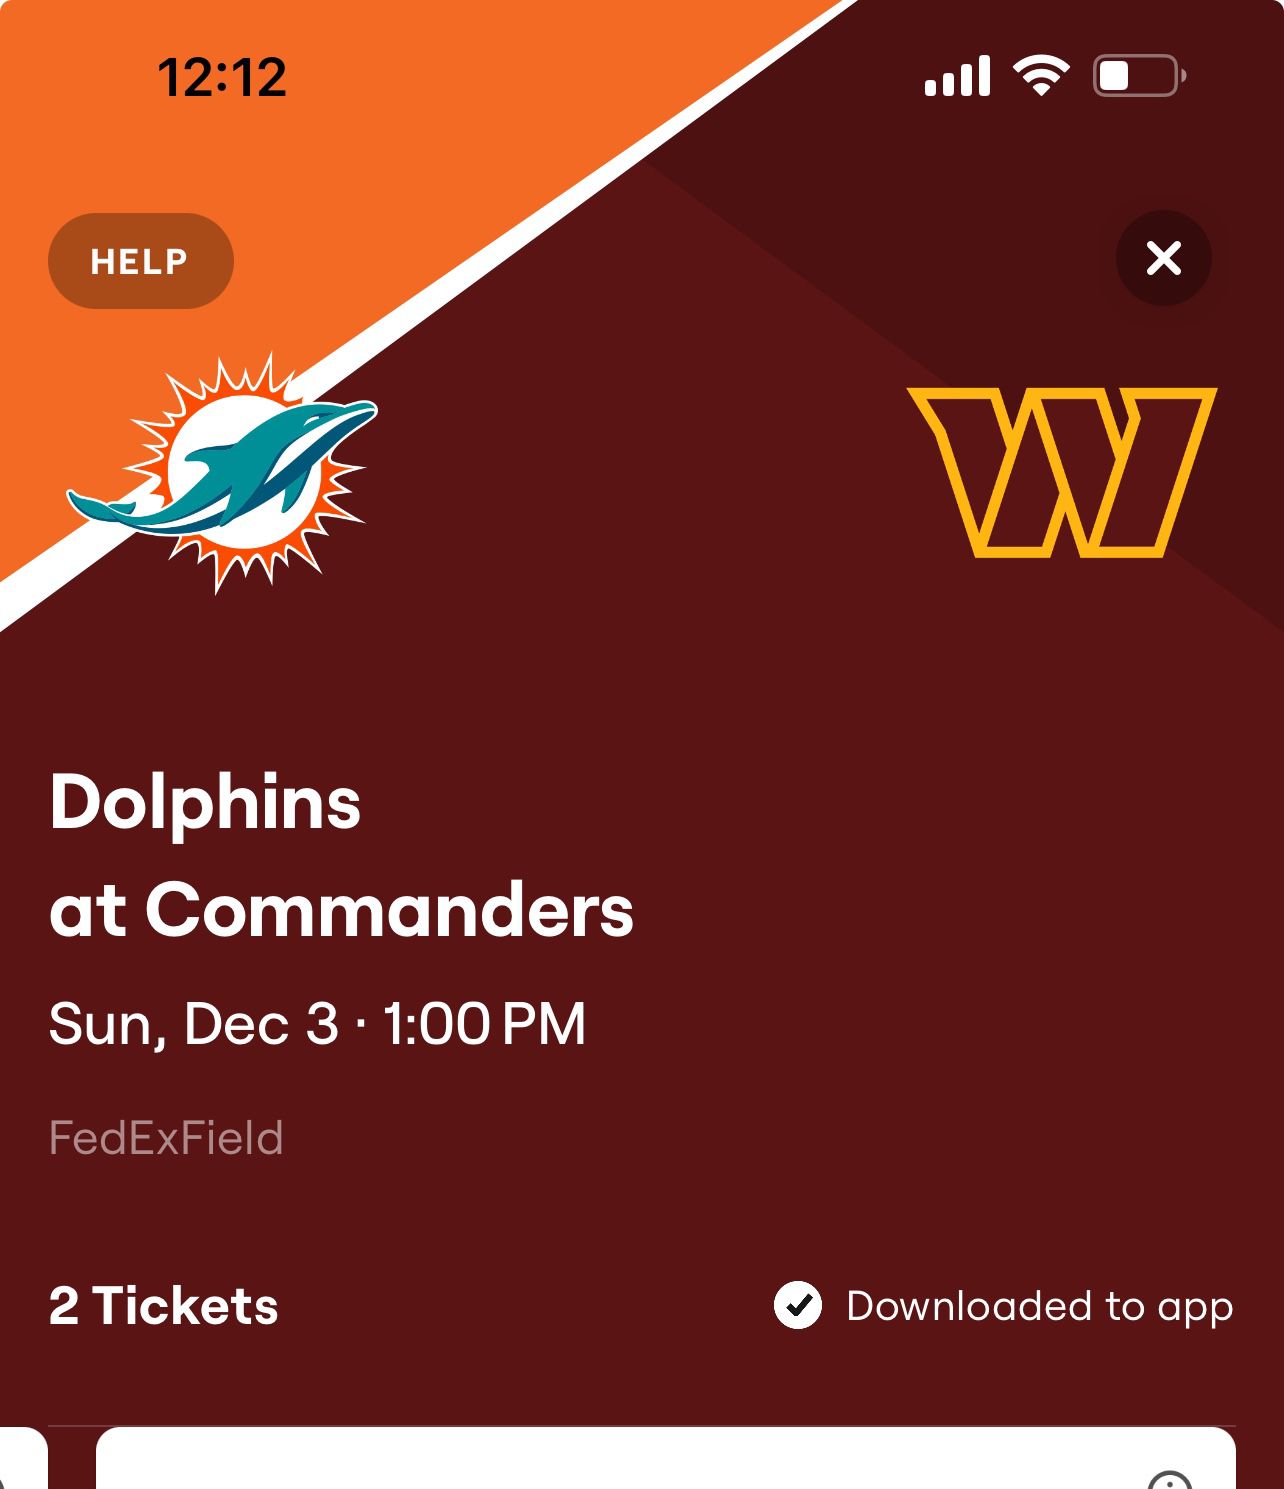 100 Level Commanders Vs Dolphins Tickets